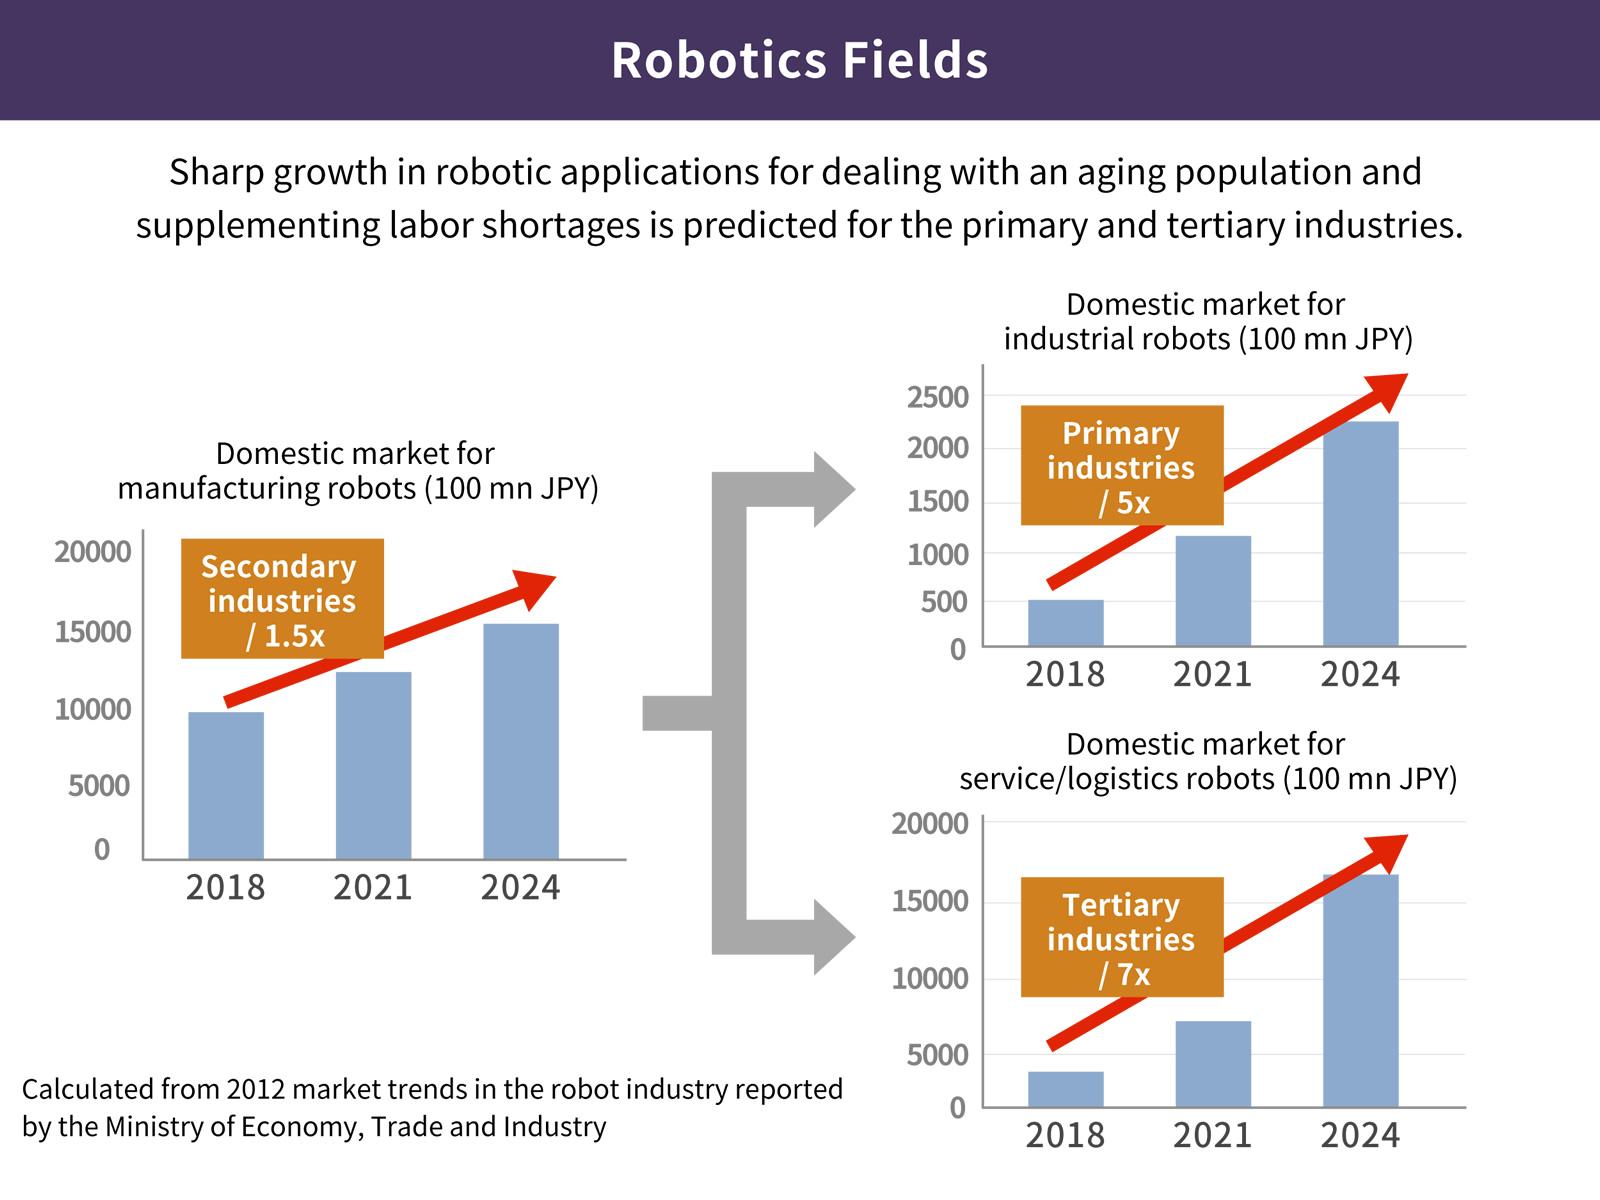 image: Robotic applications for dealing with an aging population and supplementing labor shortages are growing sharply and are predicted to continue that trend in the primary and tertiary industries.